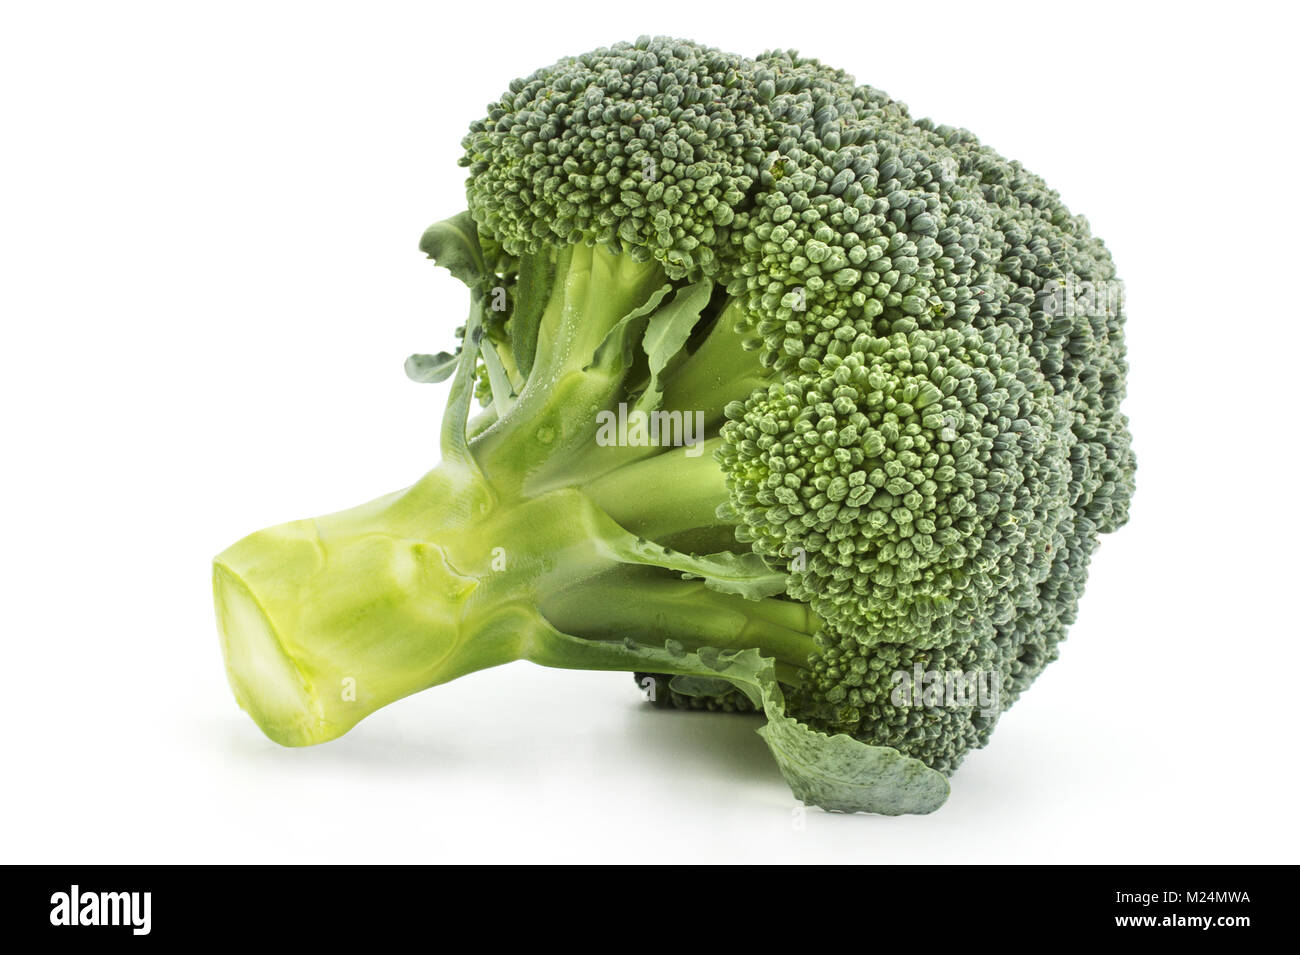 Isolated broccoli cabbage. Vegetarian food ingredient. Stock Photo